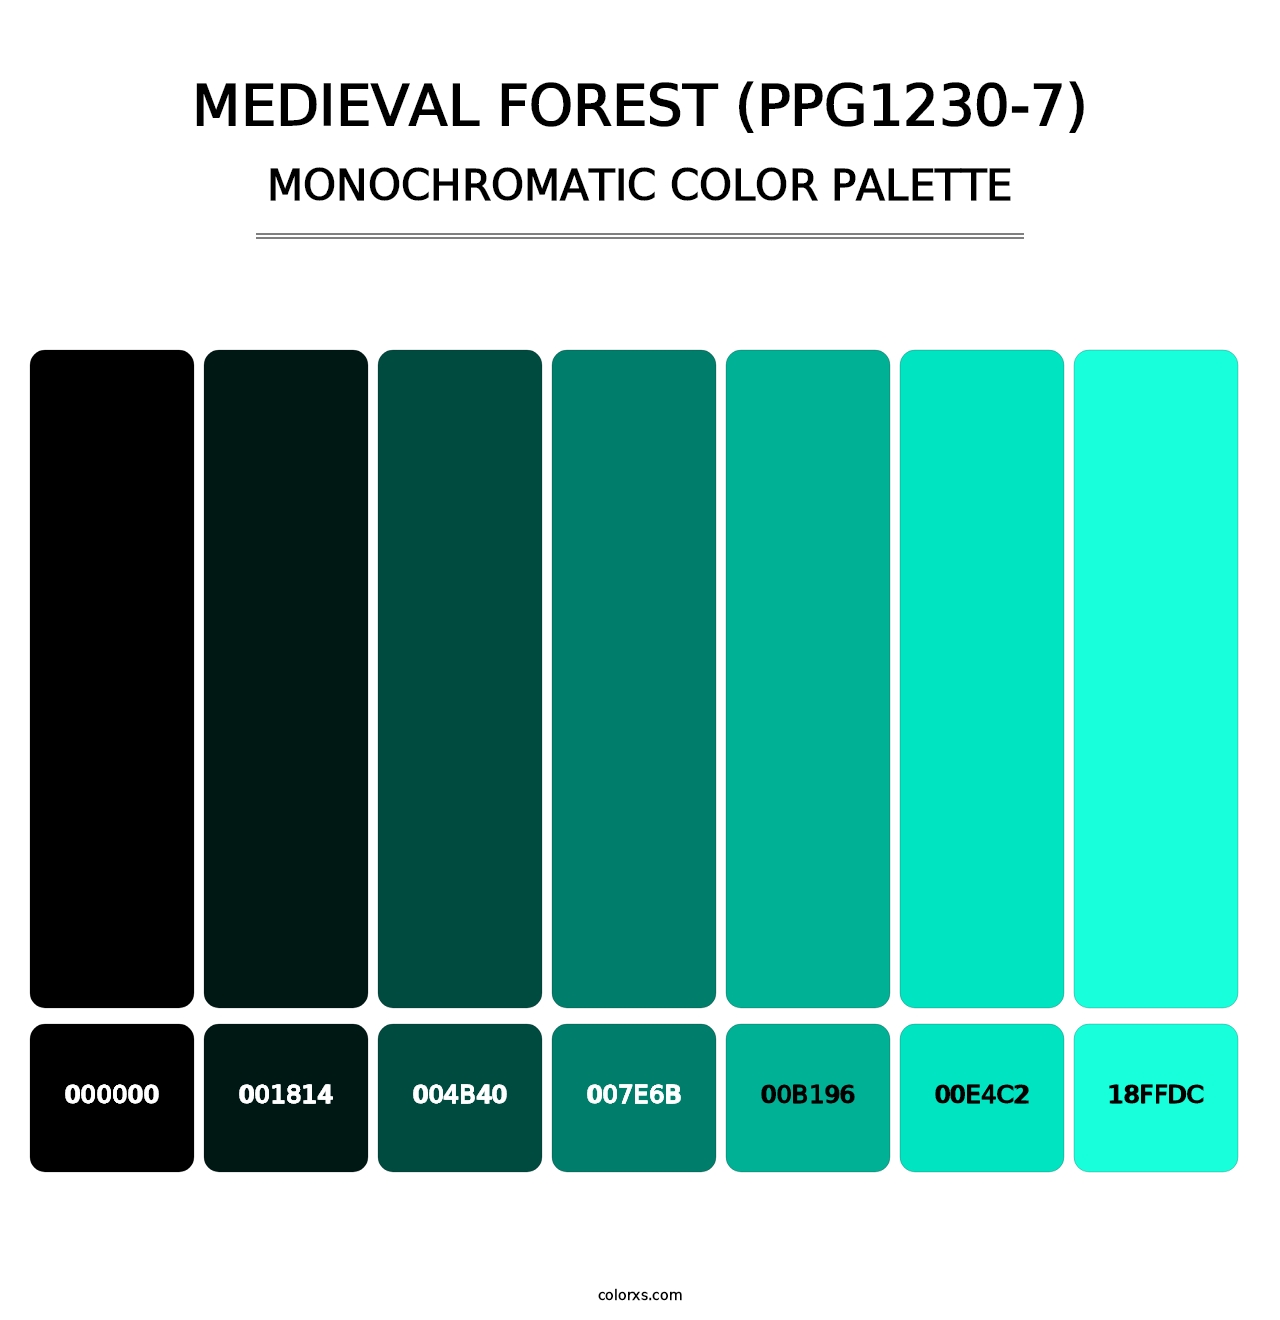 Medieval Forest (PPG1230-7) - Monochromatic Color Palette